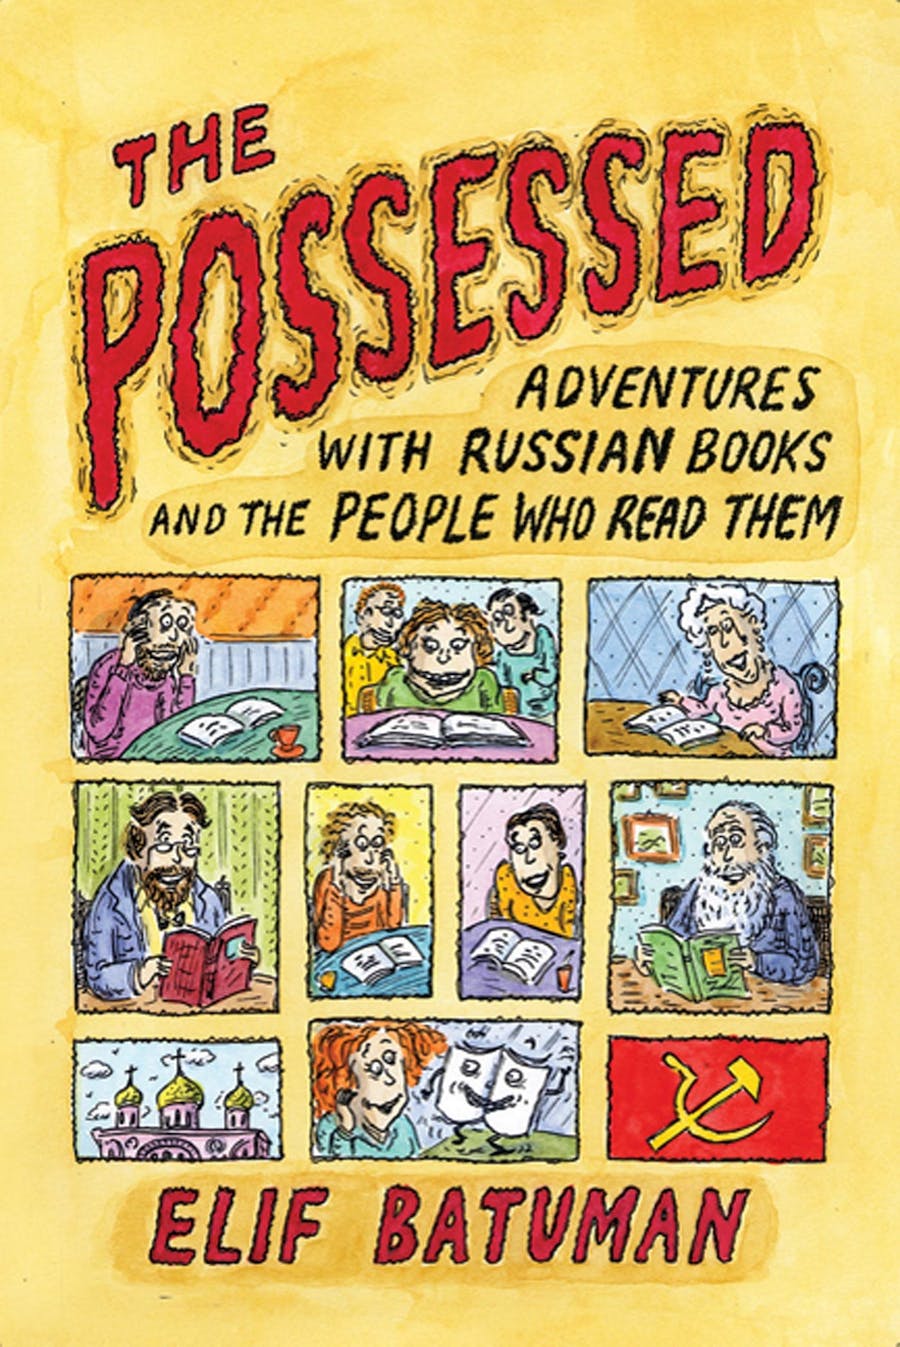 The Possessed: Adventures with Russian Books and the People Who Read Them by Elif Batuman